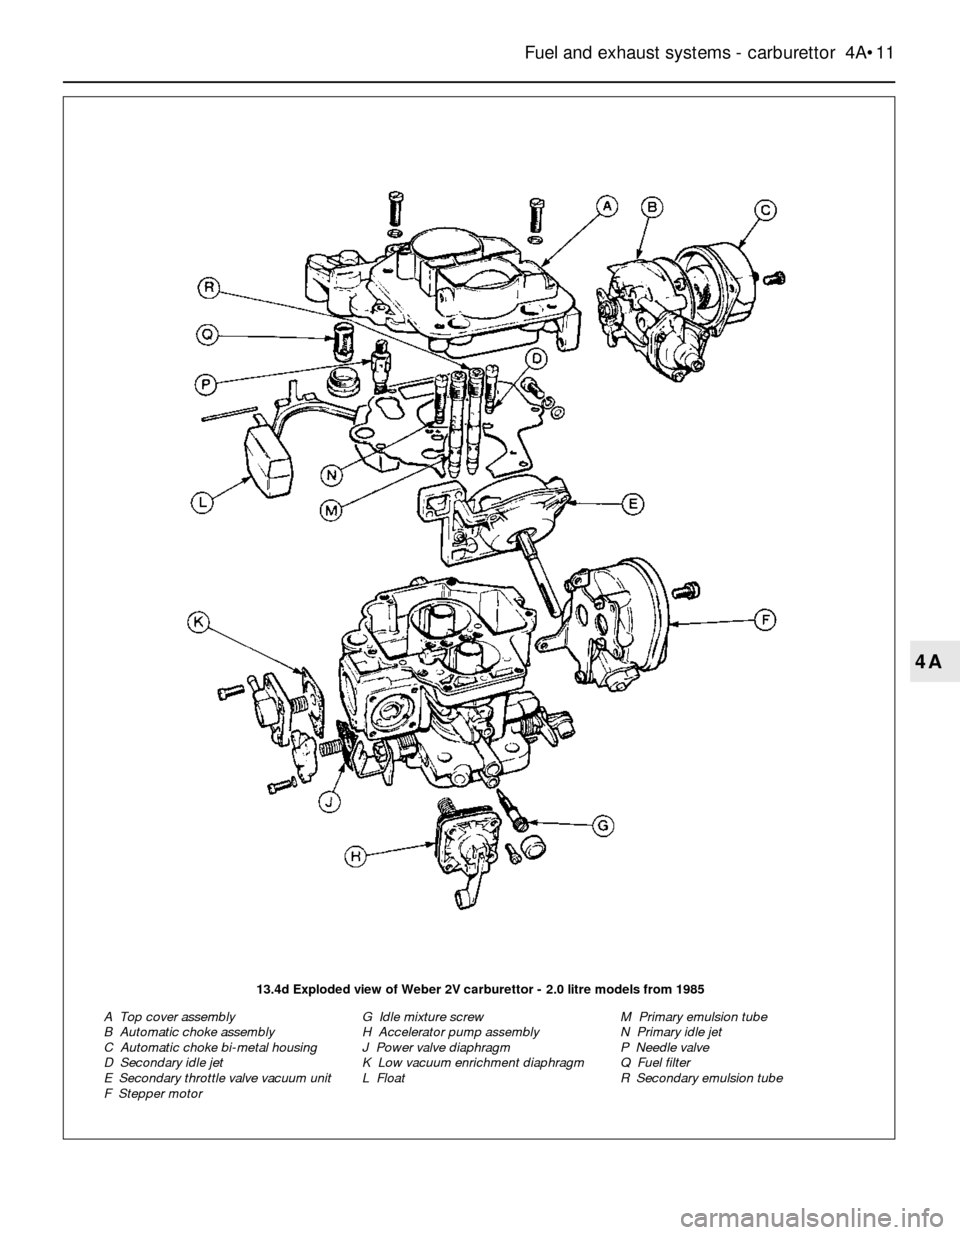 FORD SIERRA 1989 2.G Fuel And Exhaust Systems Carburettor Workshop Manual Fuel and exhaust systems - carburettor  4A•11
4A
13.4d Exploded view of Weber 2V carburettor - 2.0 litre models from 1985
A  Top cover assembly
B  Automatic choke assembly
C  Automatic choke bi-meta